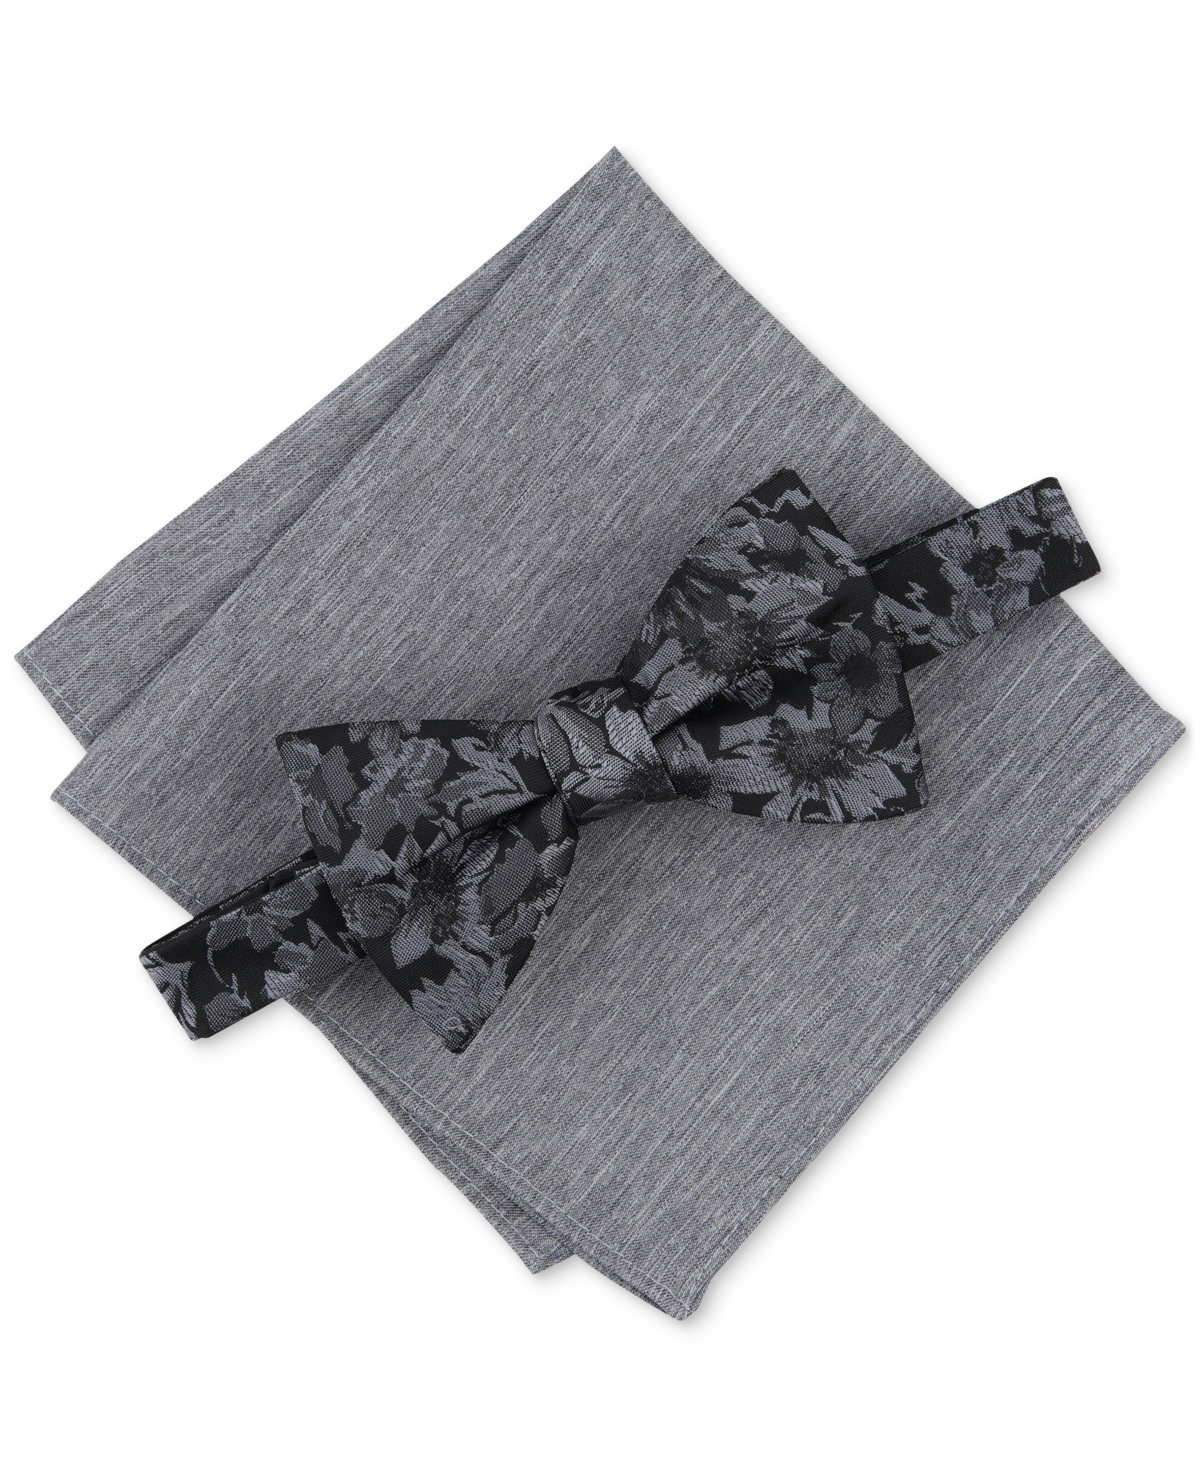 Men's Malaga Floral Bow Tie & Solid Pocket Square Set, Created for Macy's - Black